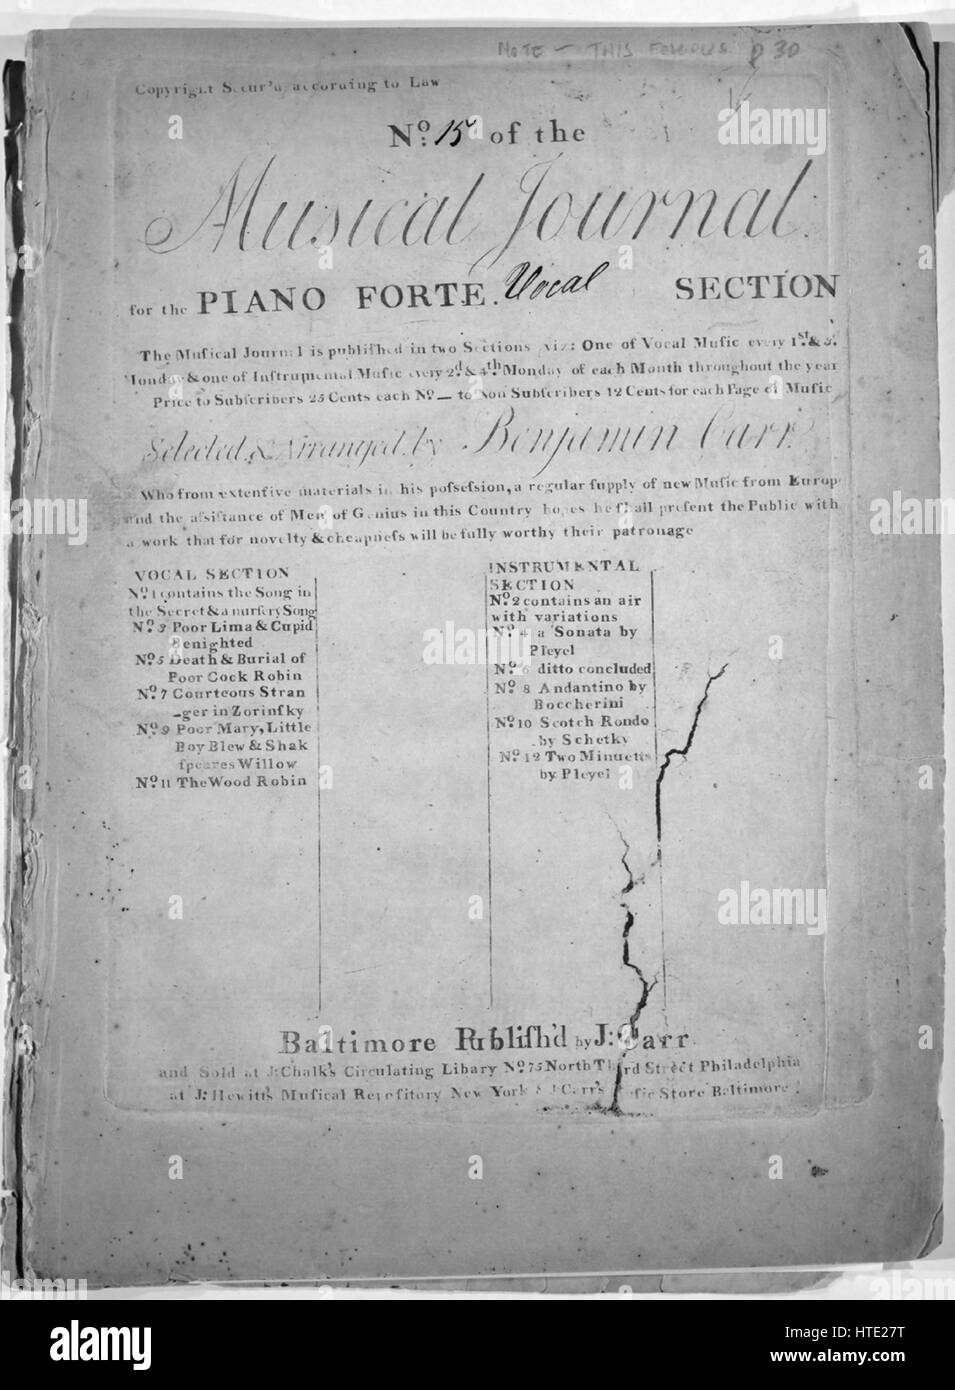 Sheet music cover image of the song '(1) Ye Ling'ring Winds; (2) Never Doubt That I Love; (3) Ye Ling'ring Winds; (4) Never Doubt that I Love (duplicate) Series Title  No 15 of the Musical Journal for the Piano Forte Vocal  Section', with original authorship notes reading 'Selected and Composed by Benjamin Carr', United States, 1900. The publisher is listed as 'J. Carr', the form of composition is '(1) strophic; (2) strophic with refrain', the instrumentation is 'piano and voice', the first line reads '(1) Ye ling'ring winds that feebly blow why thus impede my way; (2) Doubt the morning and ev Stock Photo